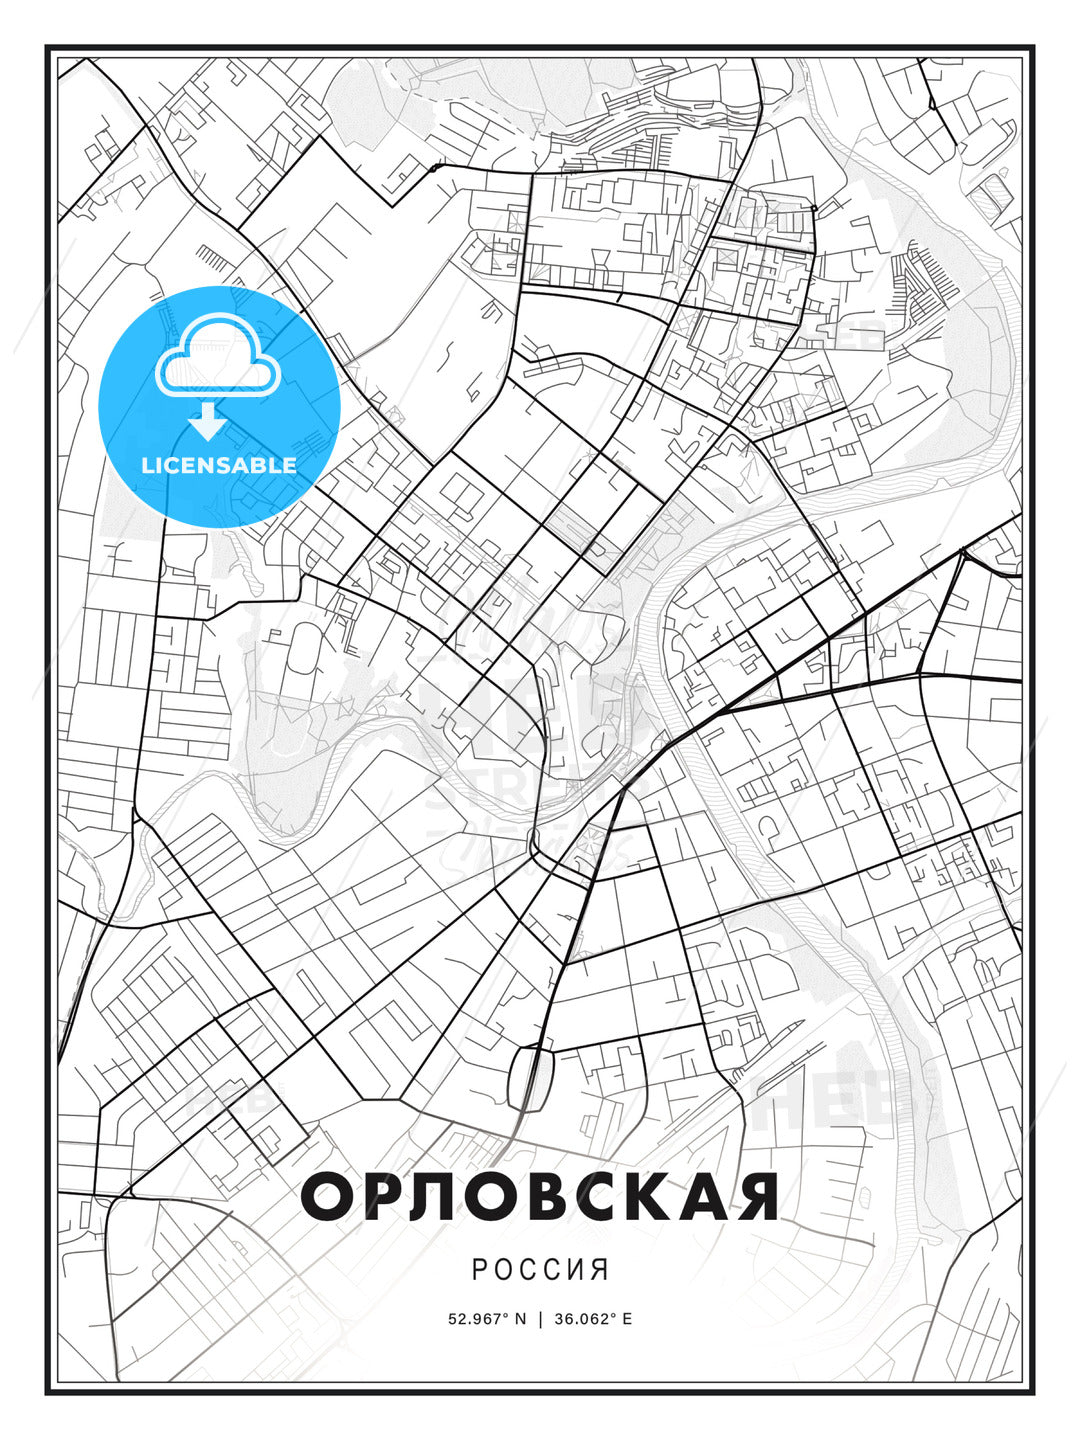 ОРЛОВСКАЯ / Oryol, Russia, Modern Print Template in Various Formats - HEBSTREITS Sketches